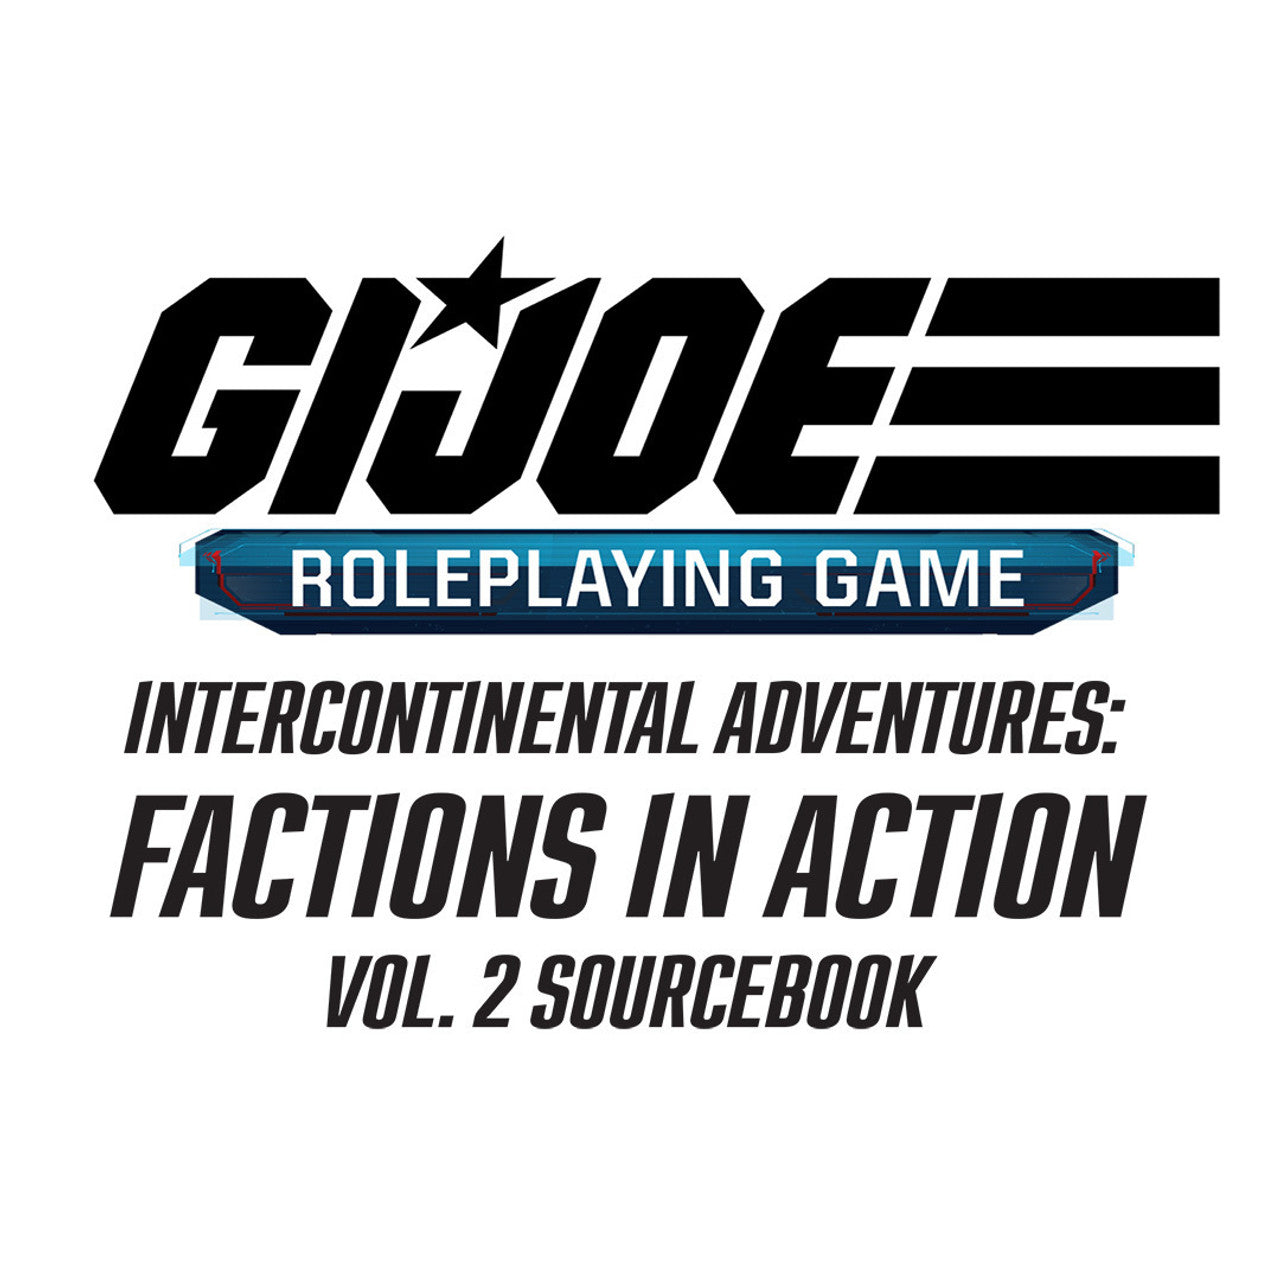 G.I. Joe: Roleplaying Game - Intercontinental Adventures: Factions in Action vol. 2